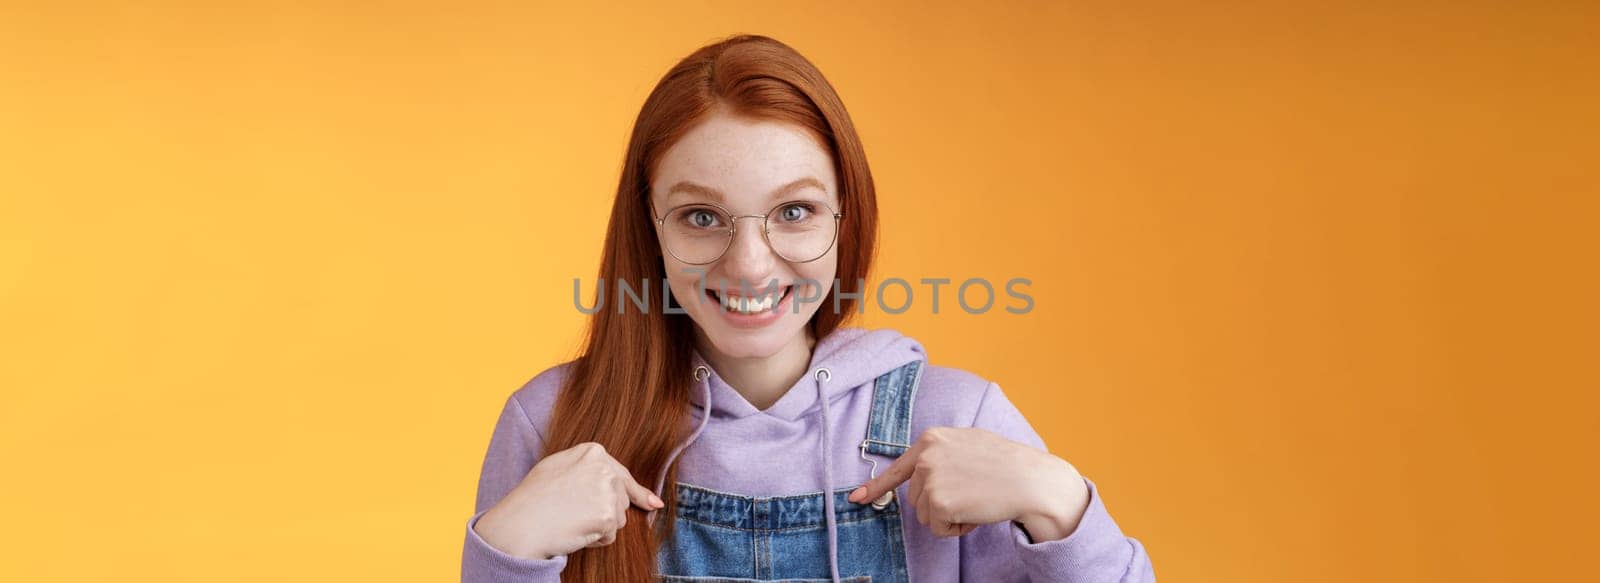 Surprised happy pleased happy smiling young redhead girl getting awesome proposal grinning questioned pointing herself laughing full disbelief receive promotion unbelievable chance. Copy space